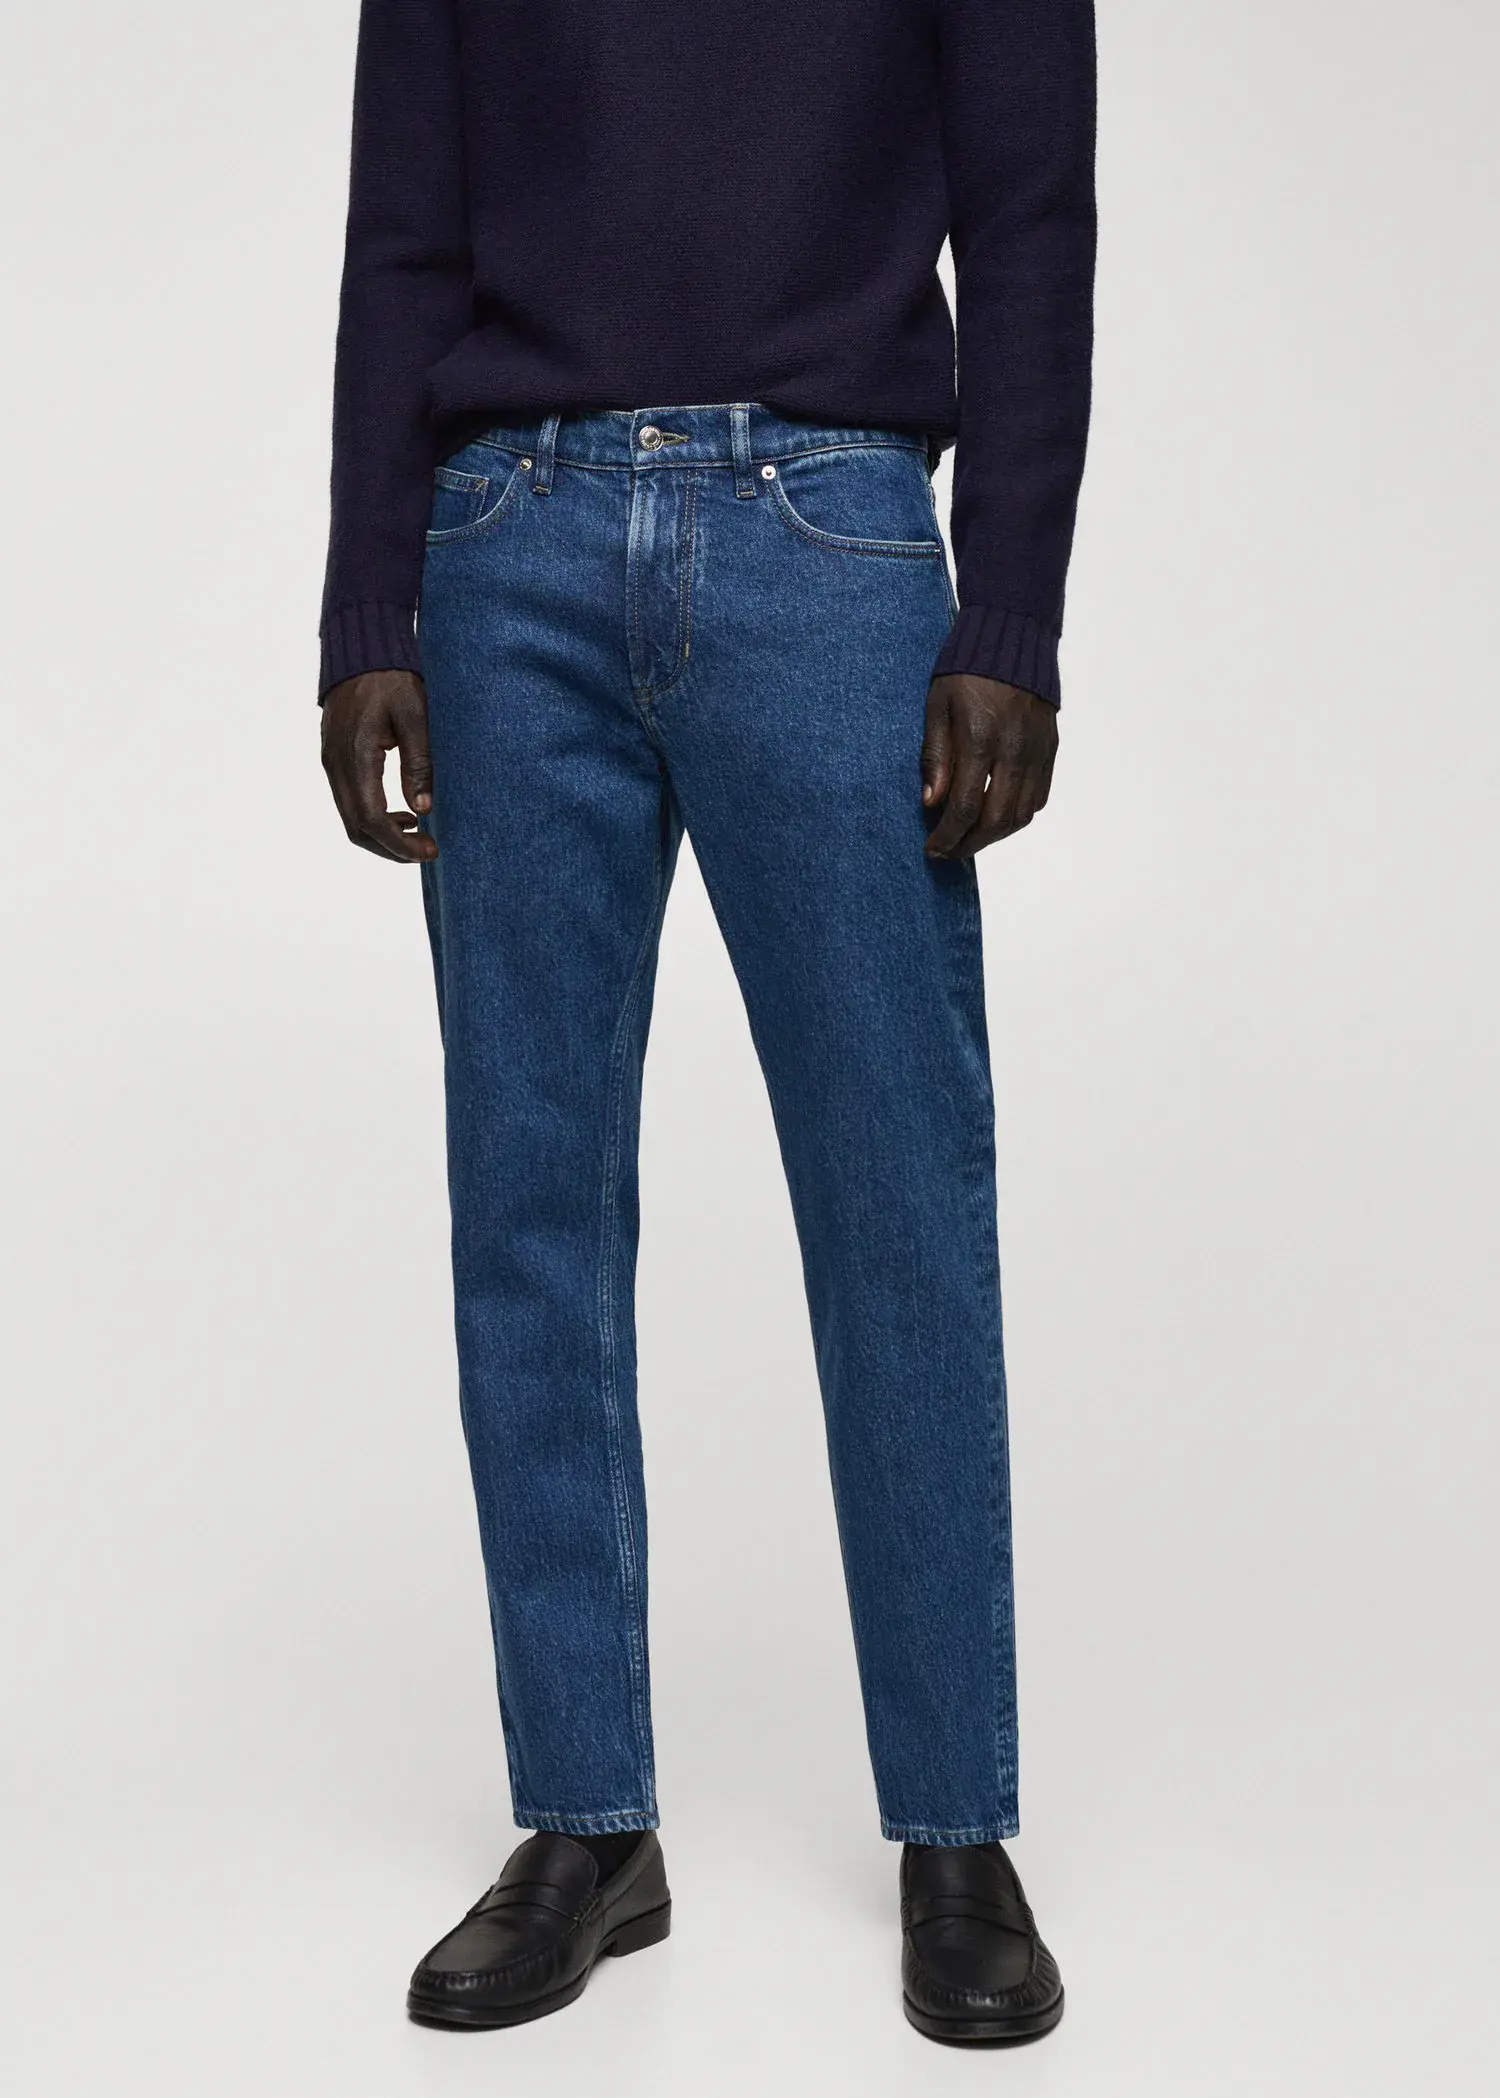 Mango Ben tapered cropped jeans. 2